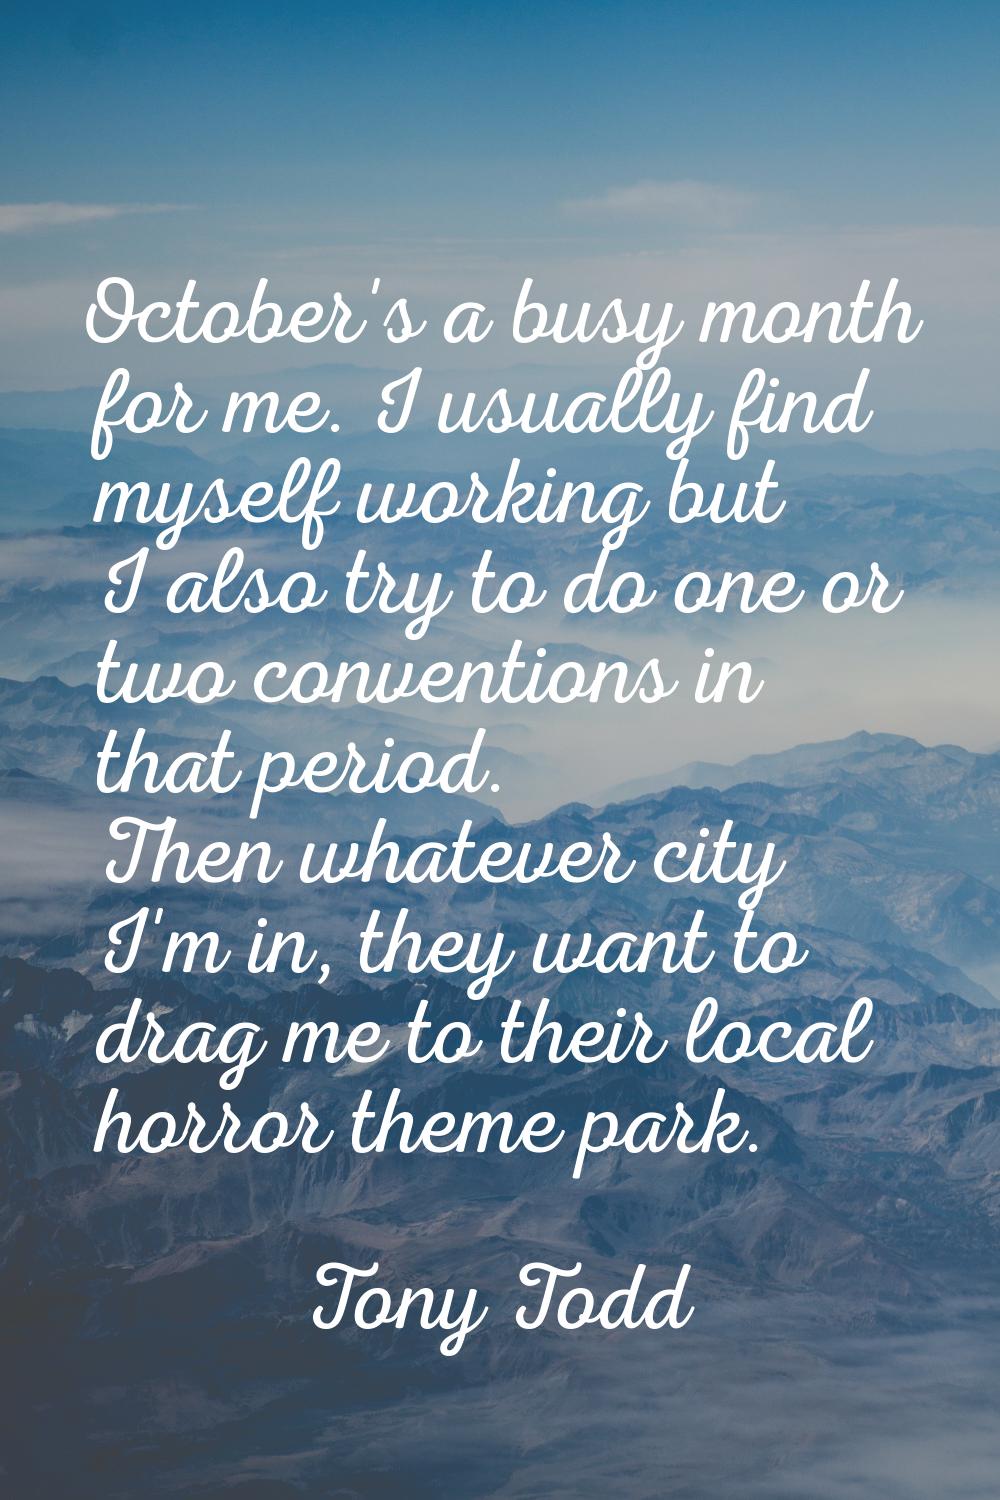 October's a busy month for me. I usually find myself working but I also try to do one or two conven